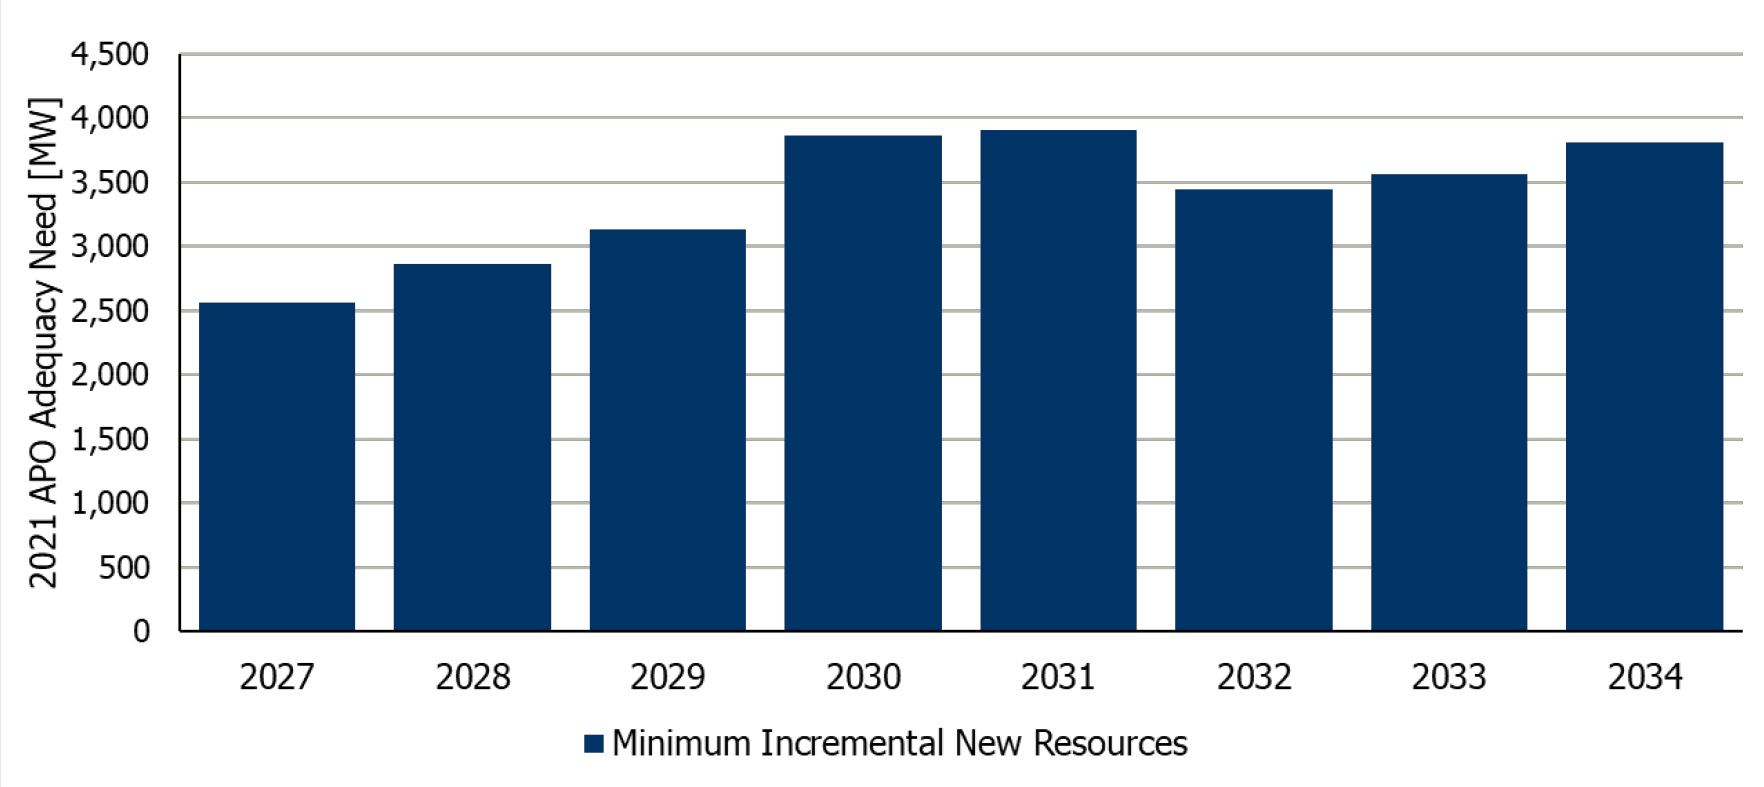 A chart showing the minimum new energy resources required as estimated by the IESO